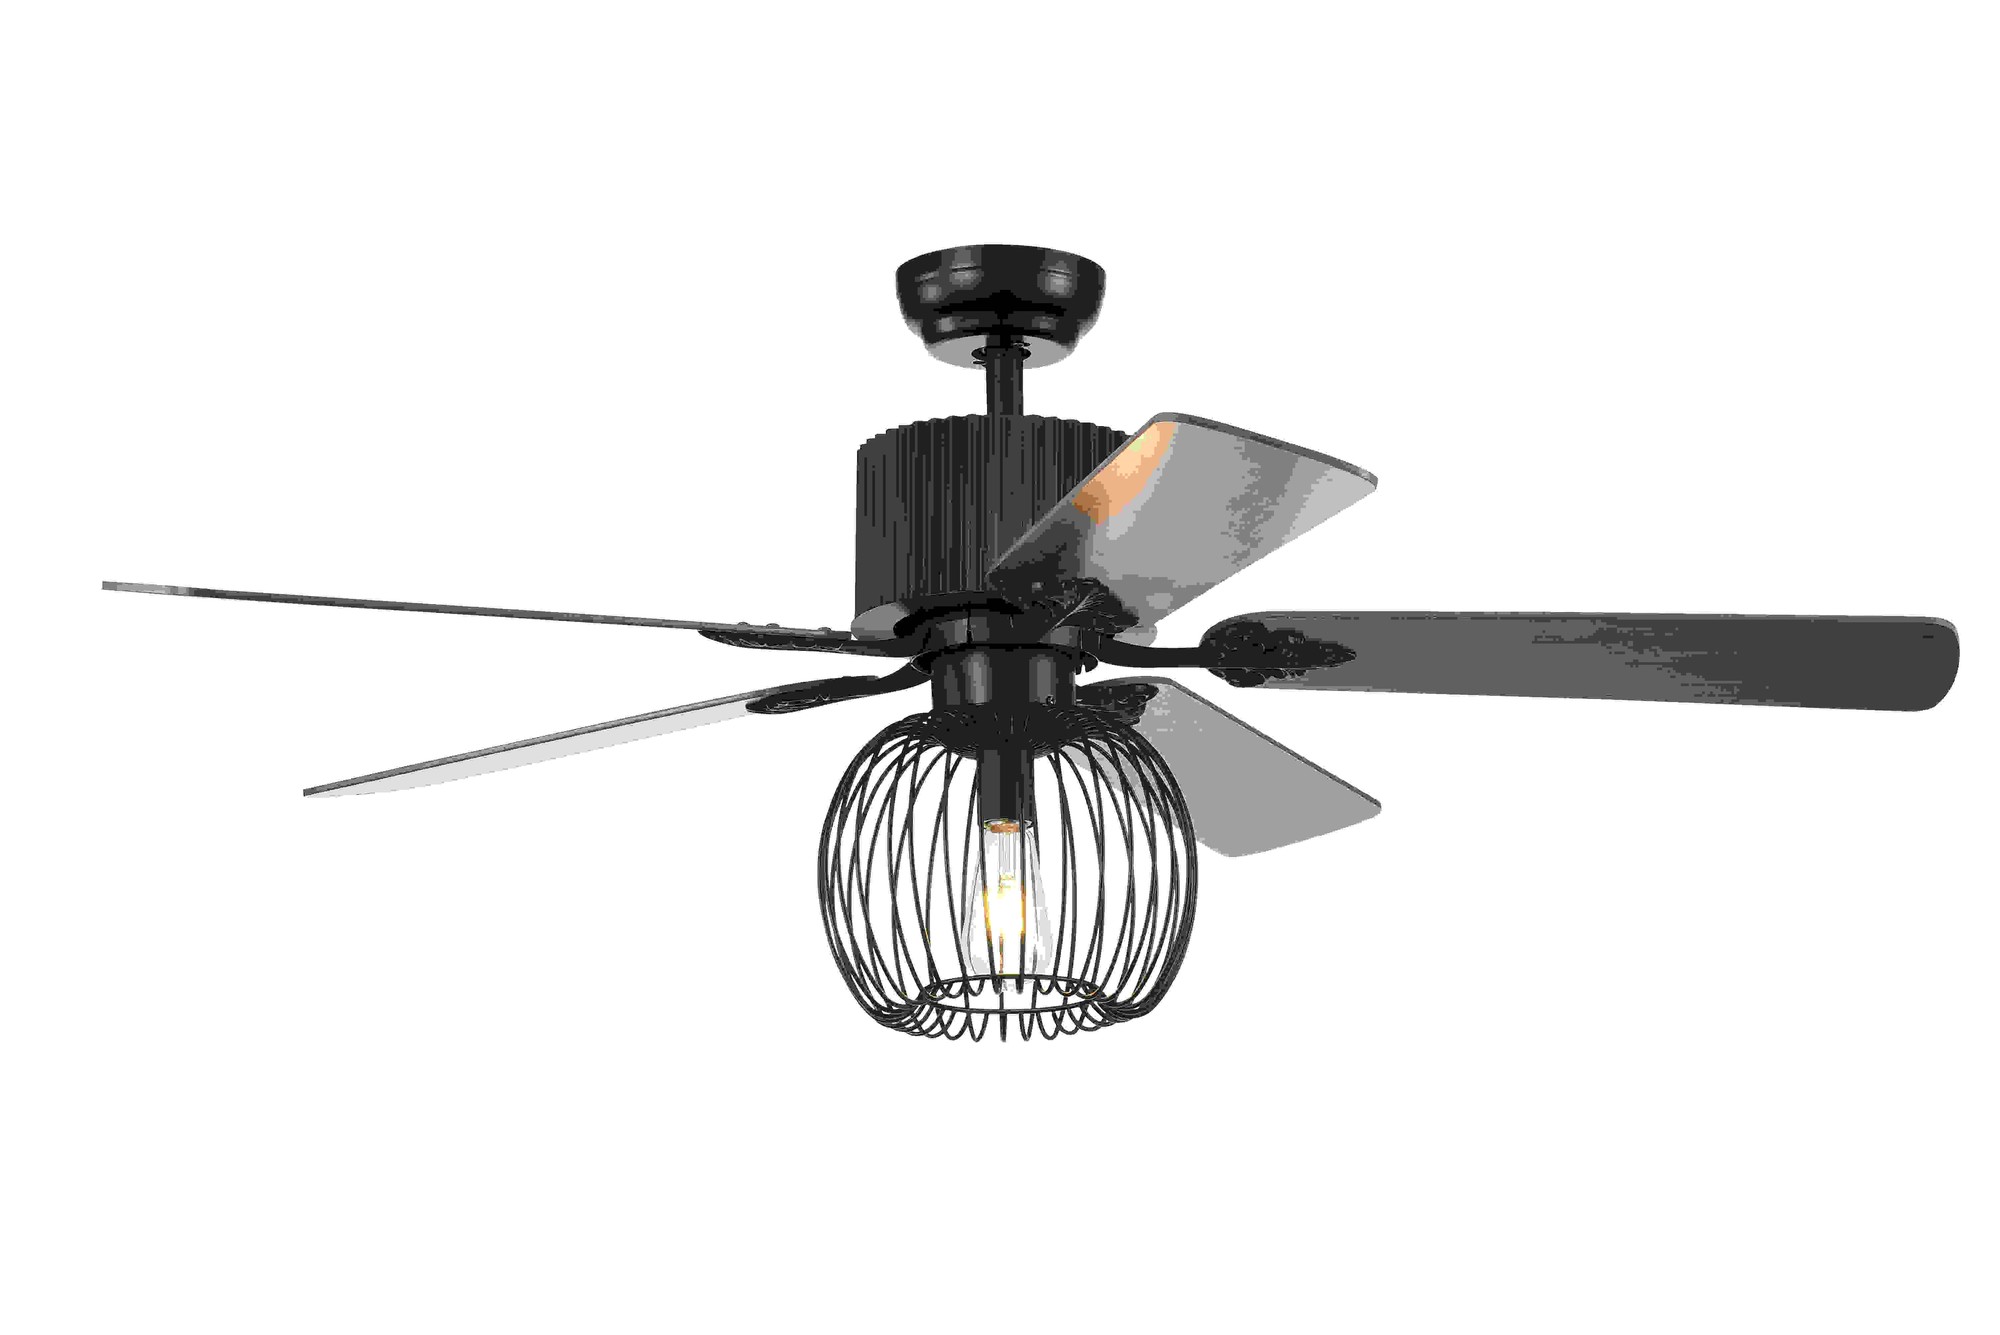 Aguano Black 52-inch Lighted Ceiling Fan (Remote Controlled & 2 Color Option Blades)